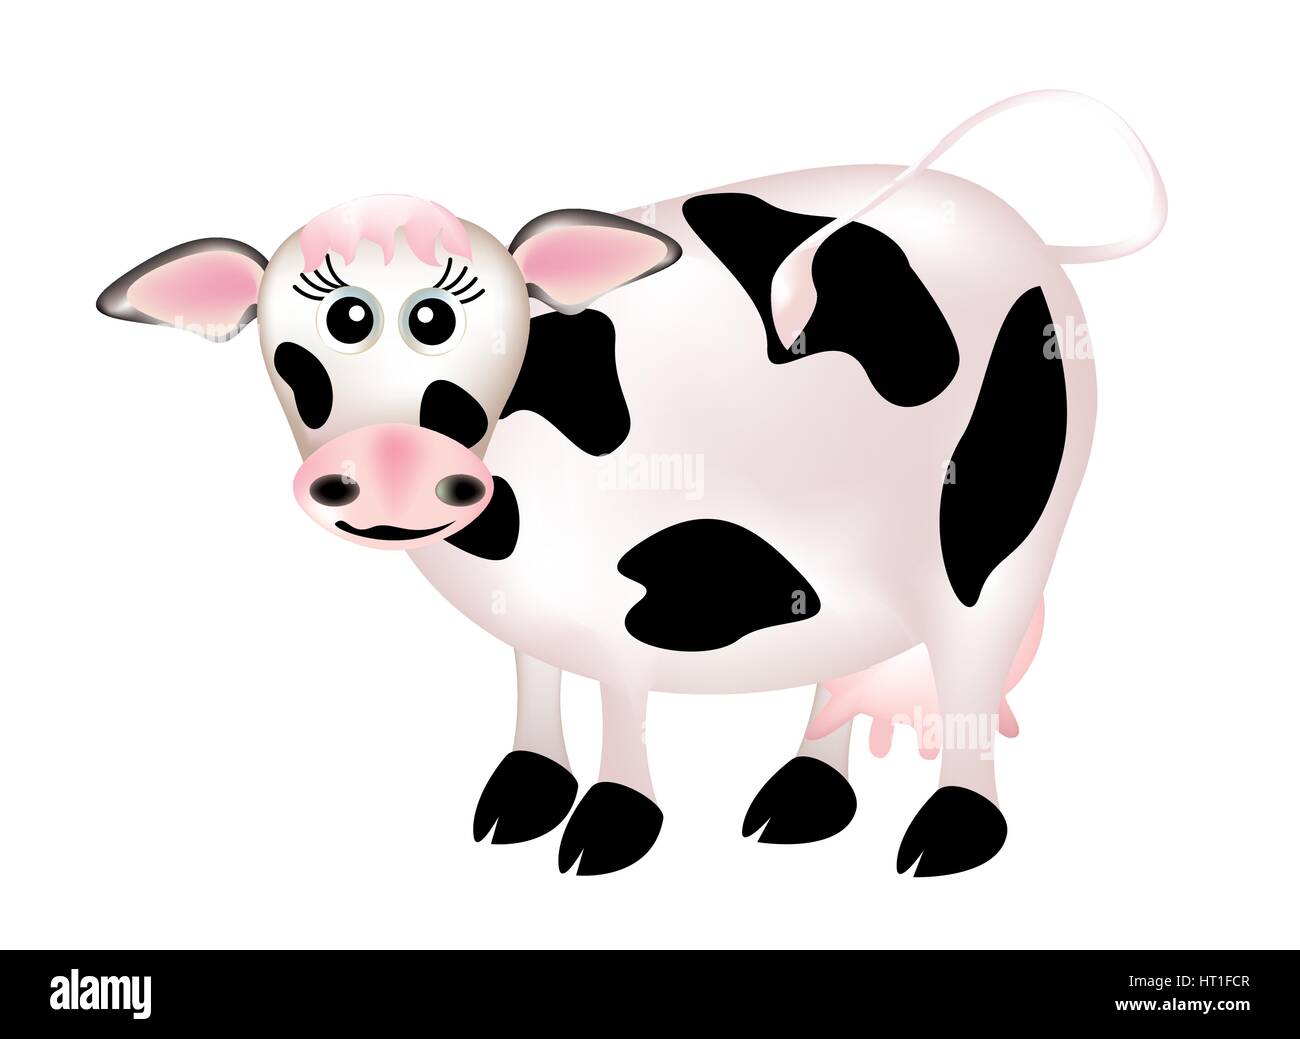 Group of cows Stock Vector